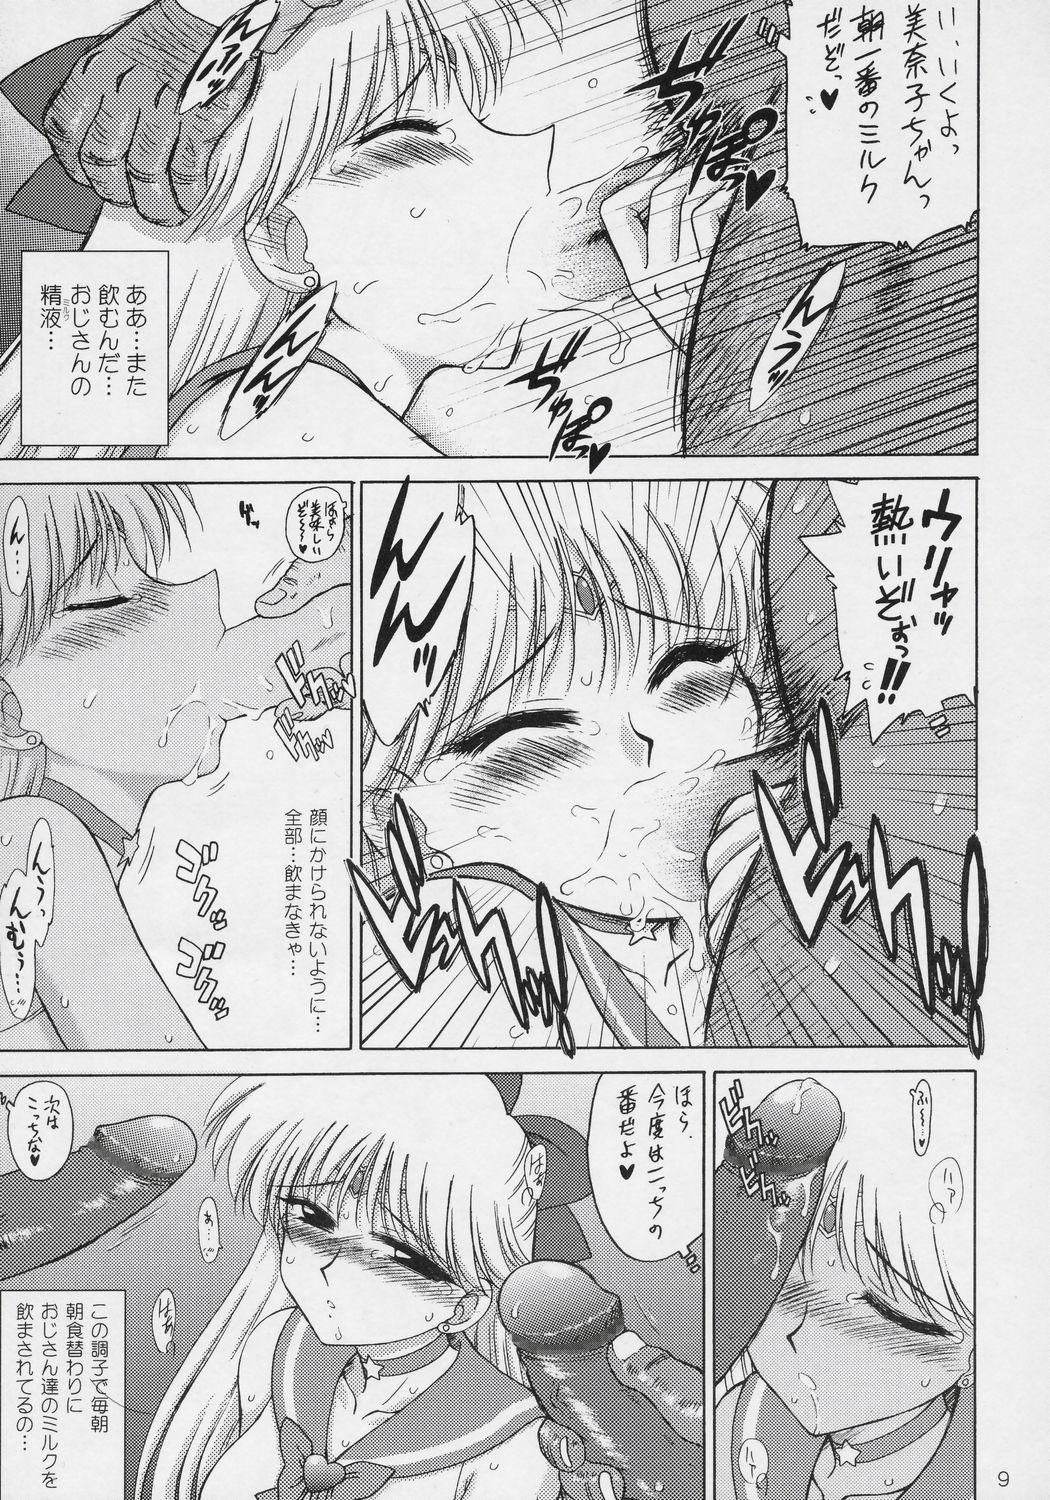 Teenie Super Fly - Sailor moon Kissing - Page 8